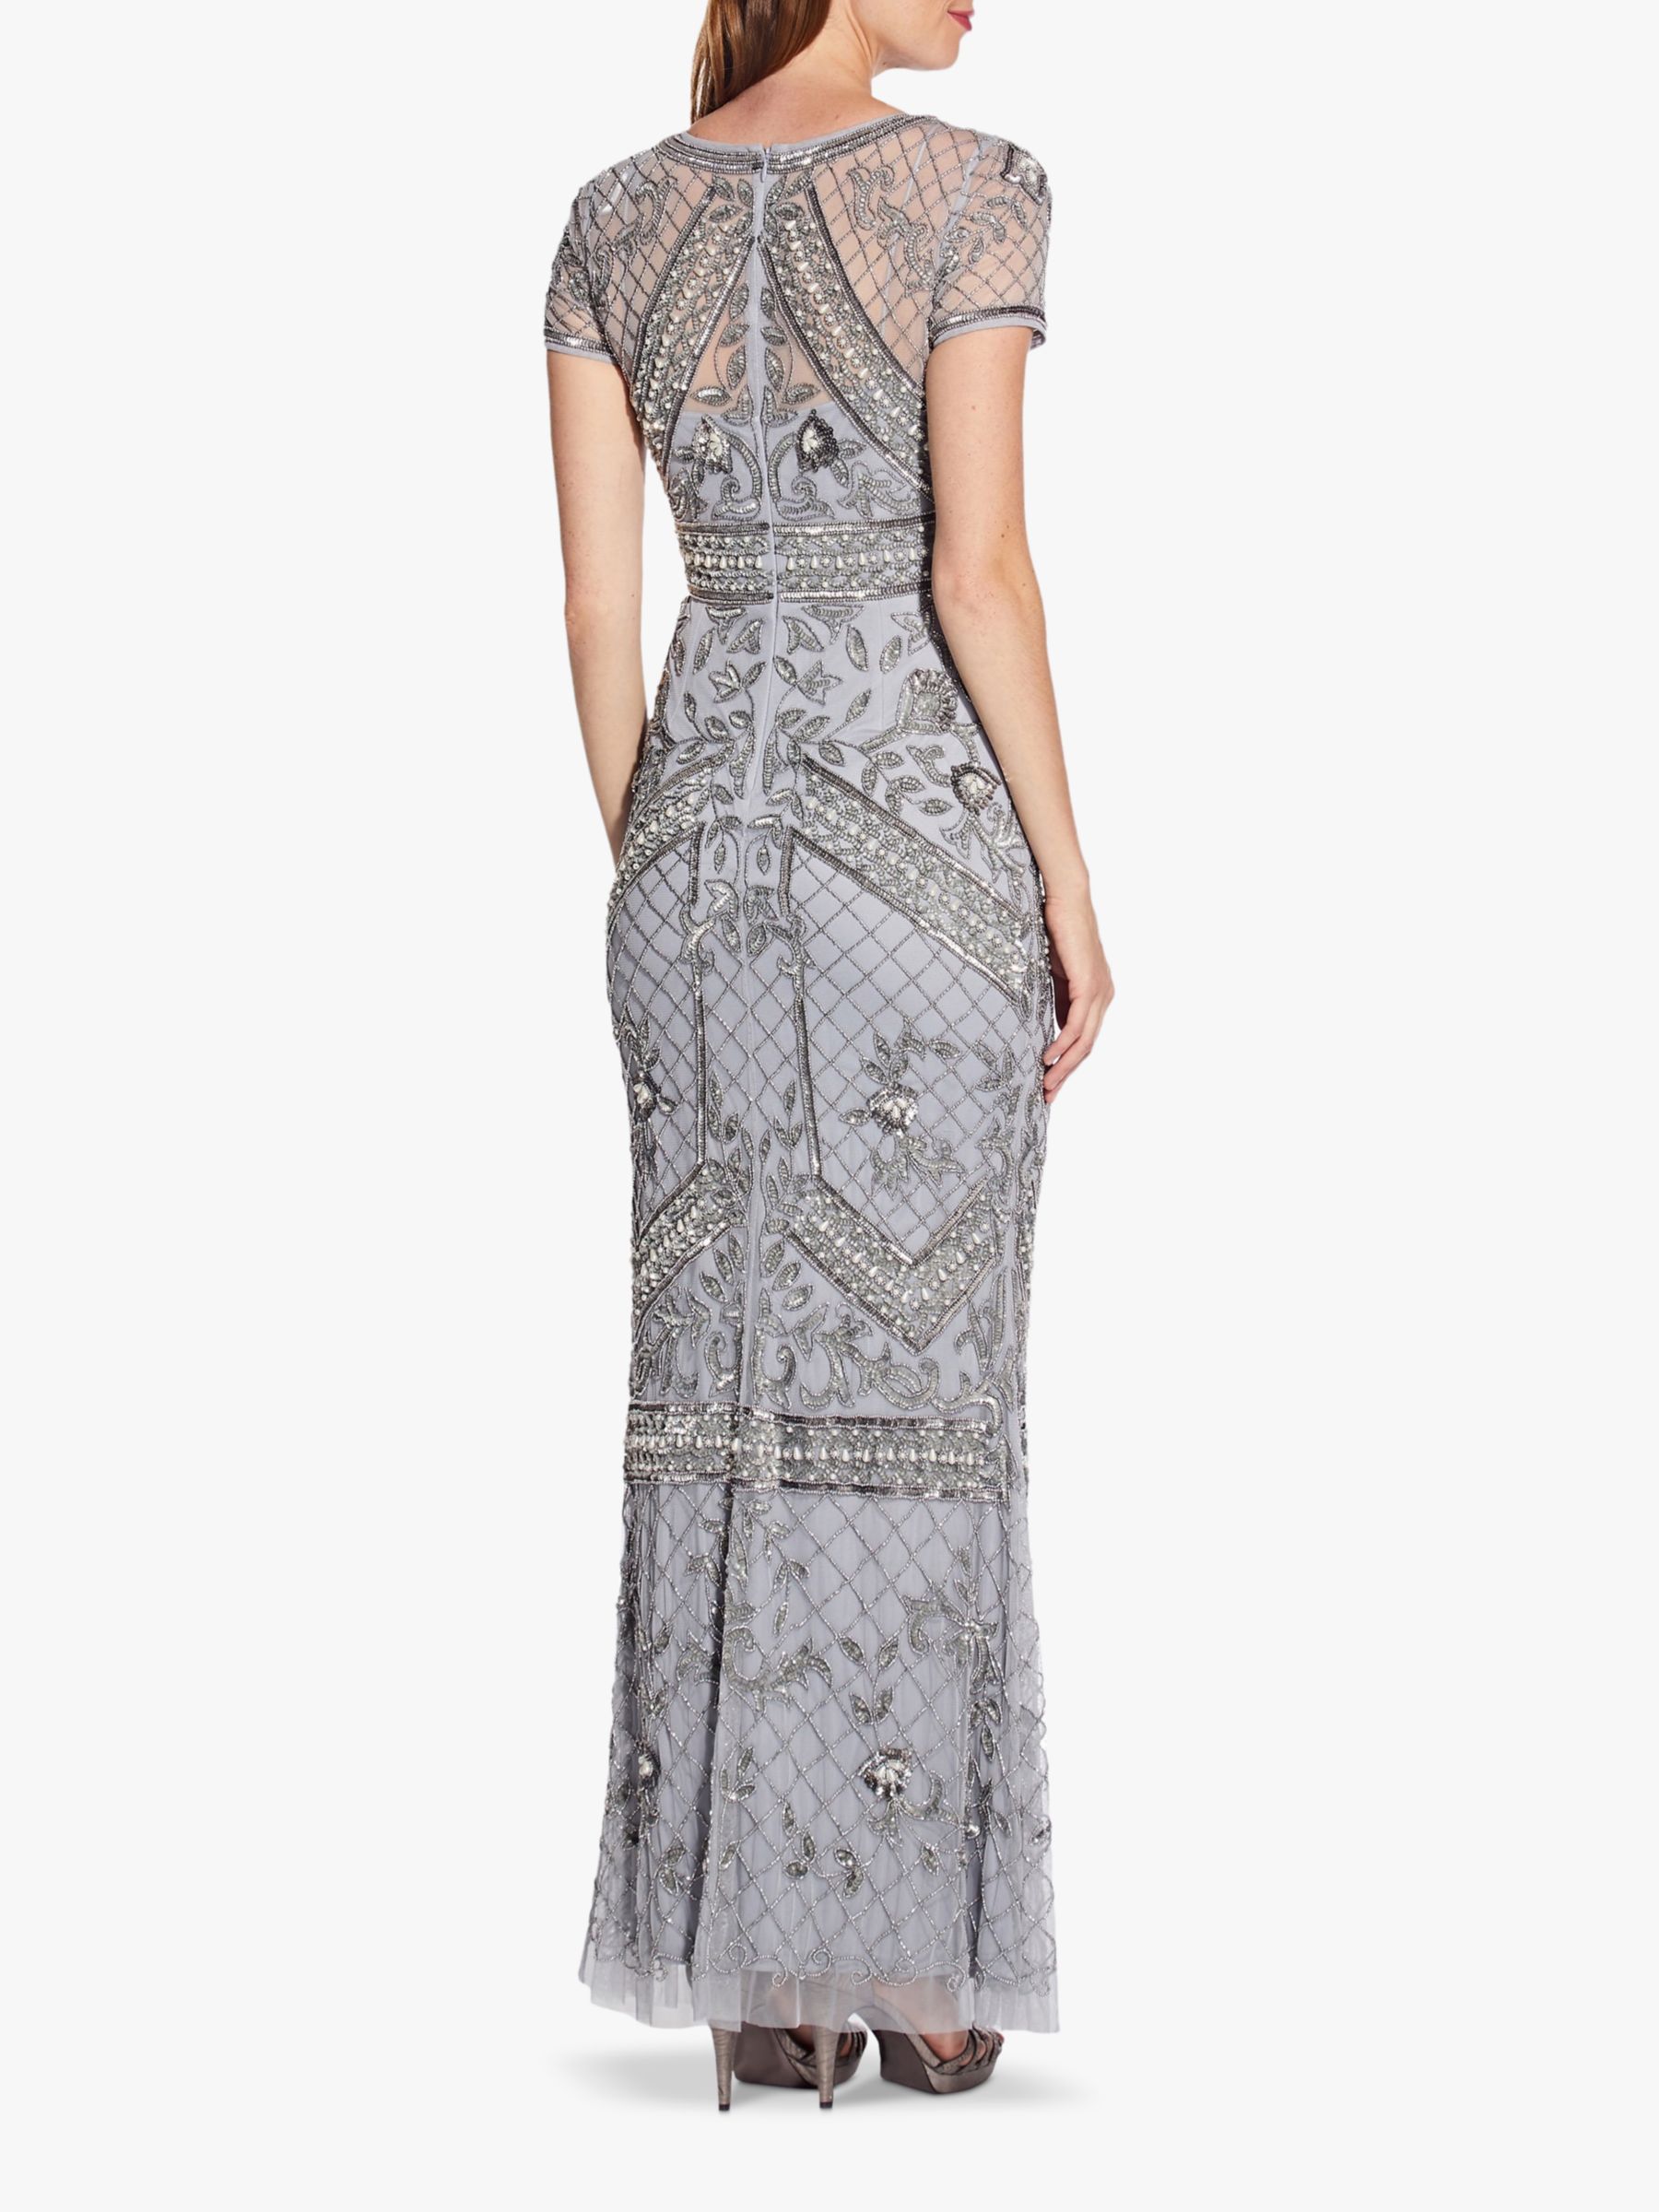 Adrianna Papell Sequin Evening Dress with Beaded Waist Detail, Silver Mist